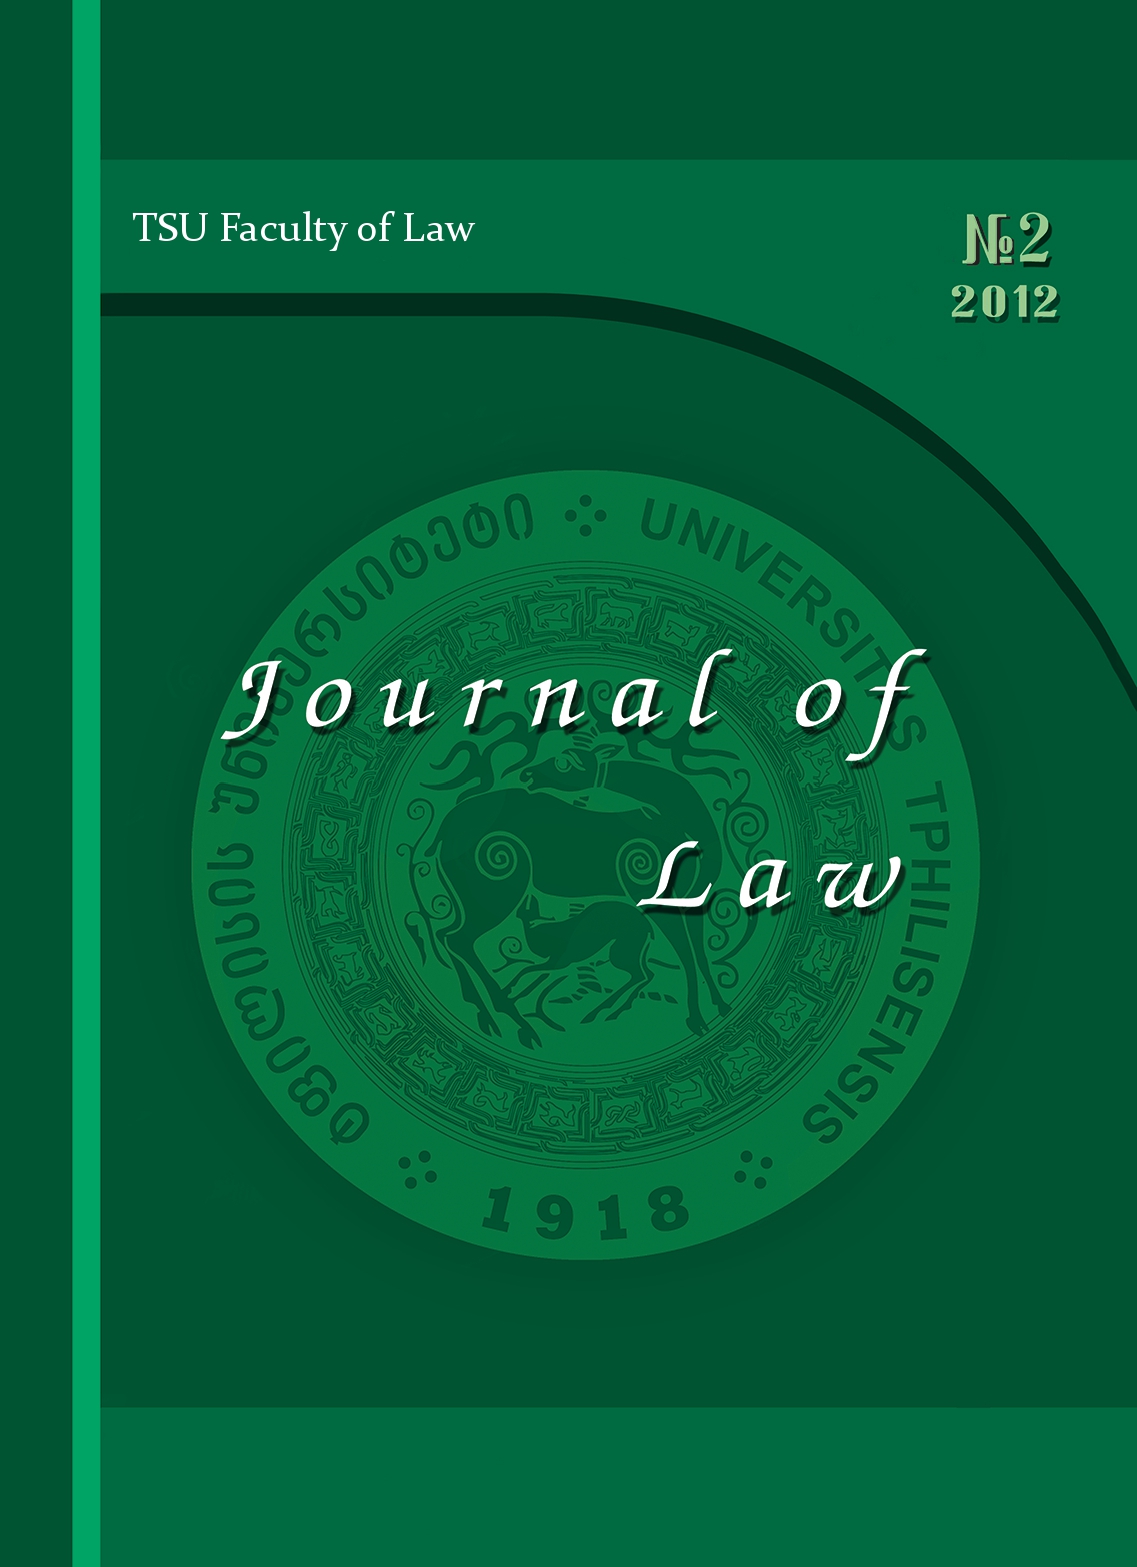 					View No. 2 (2012): Journal of Law
				